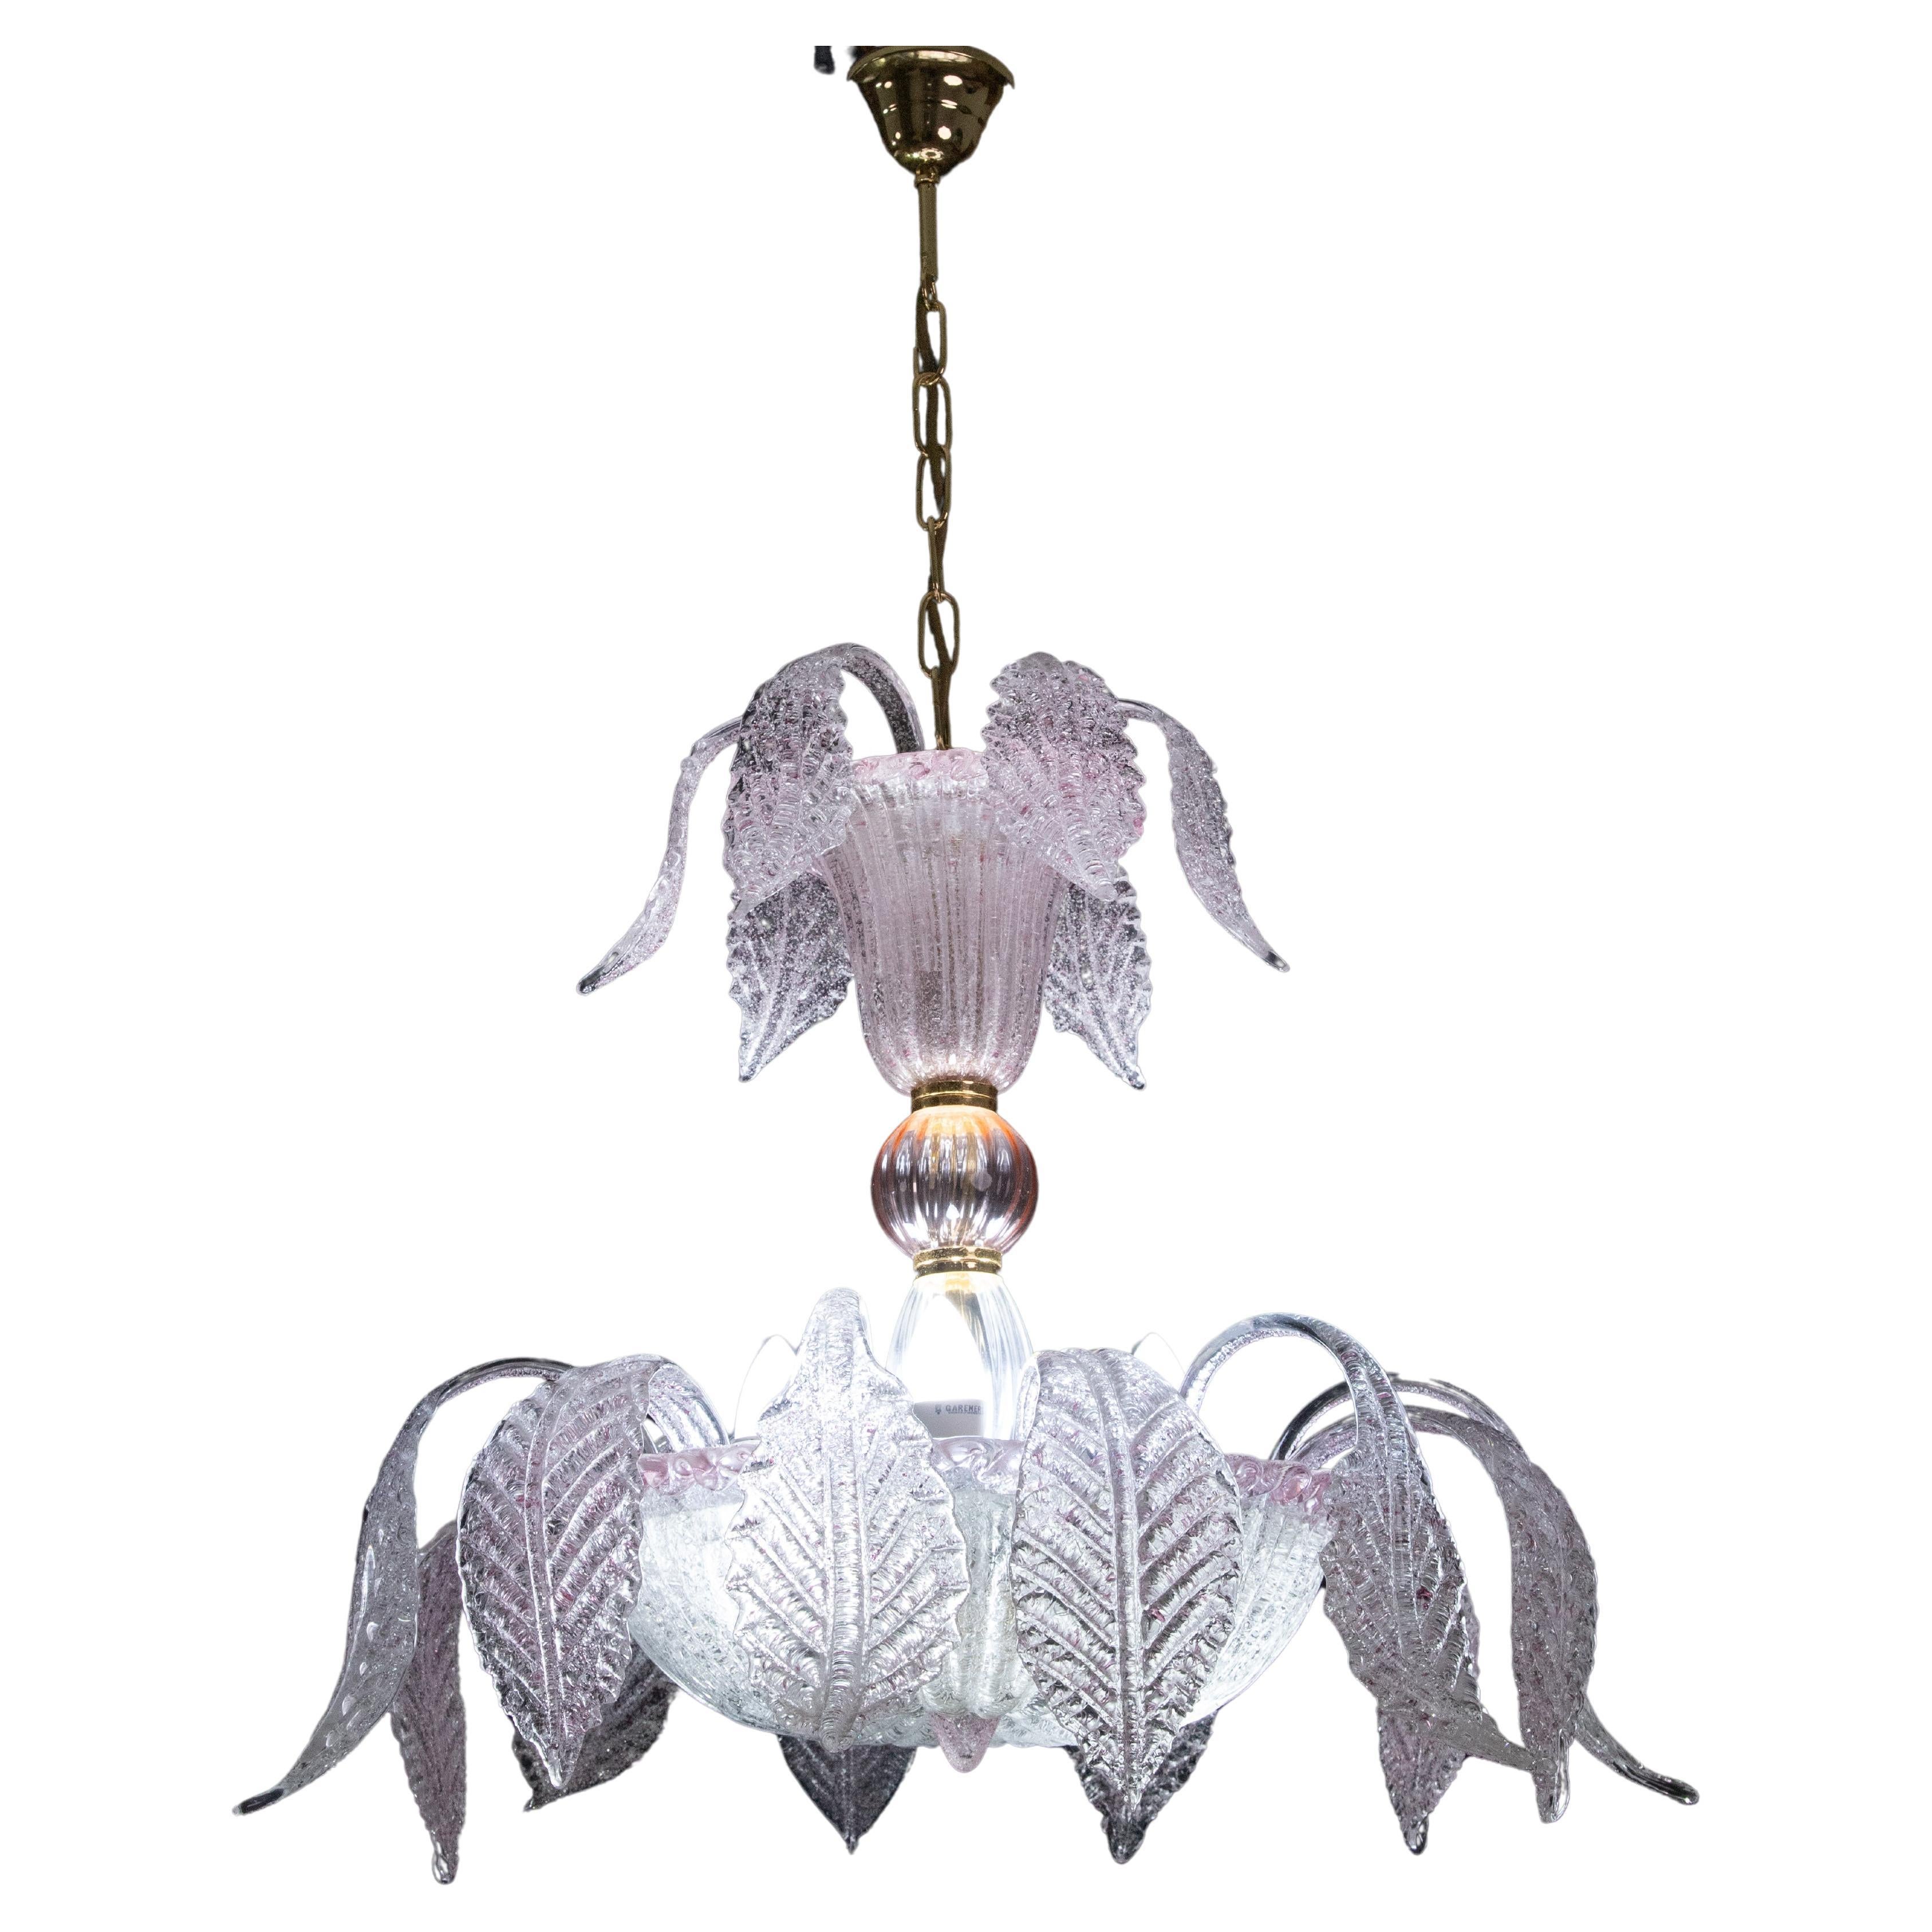 Venetian murano chandelier with high leaves and low leaves.

The high leaves are smaller, the low leaves larger, all handcrafted and different from each other, a beautiful pink cup at the bottom.

The mounted chandelier with chain measures 90